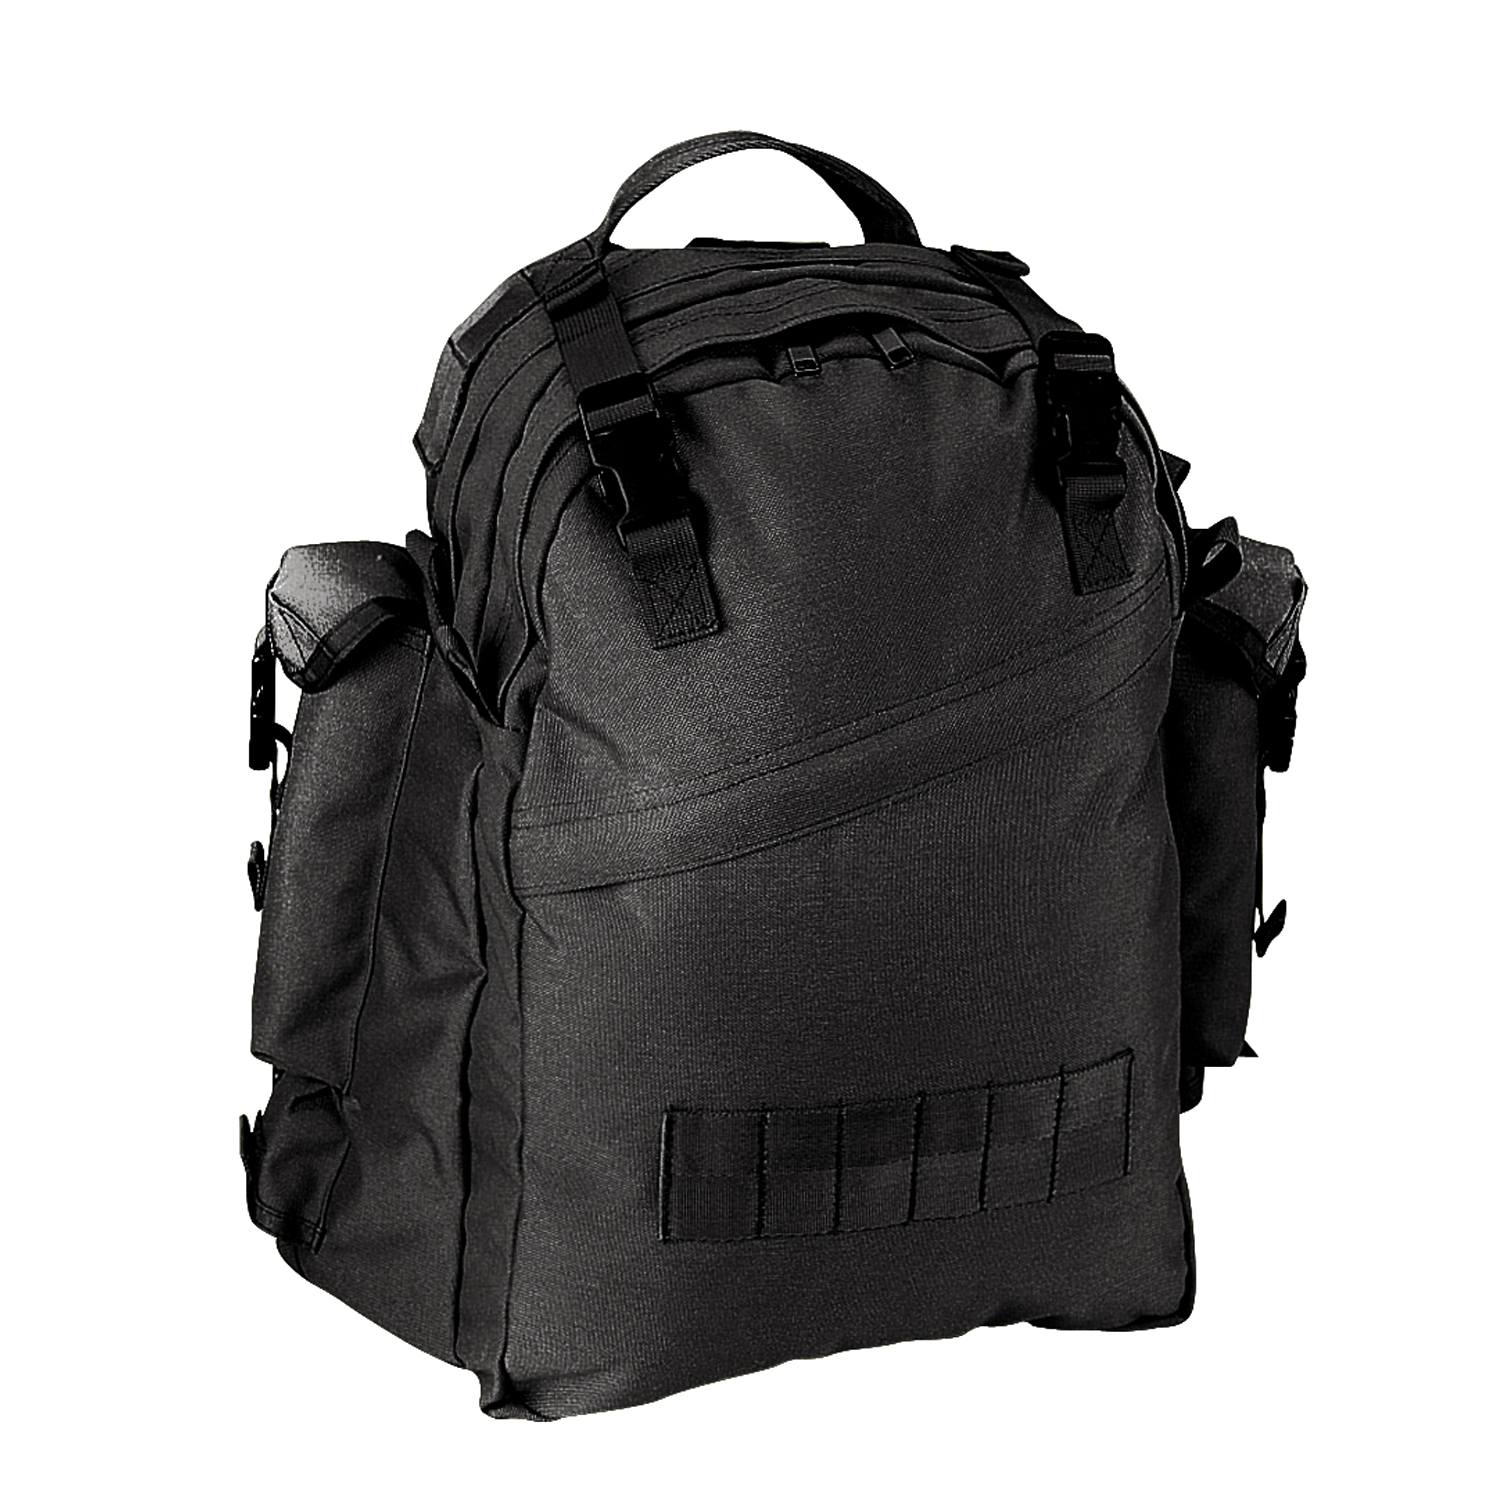 Rothco Special Forces Assault Pack Black (2280)